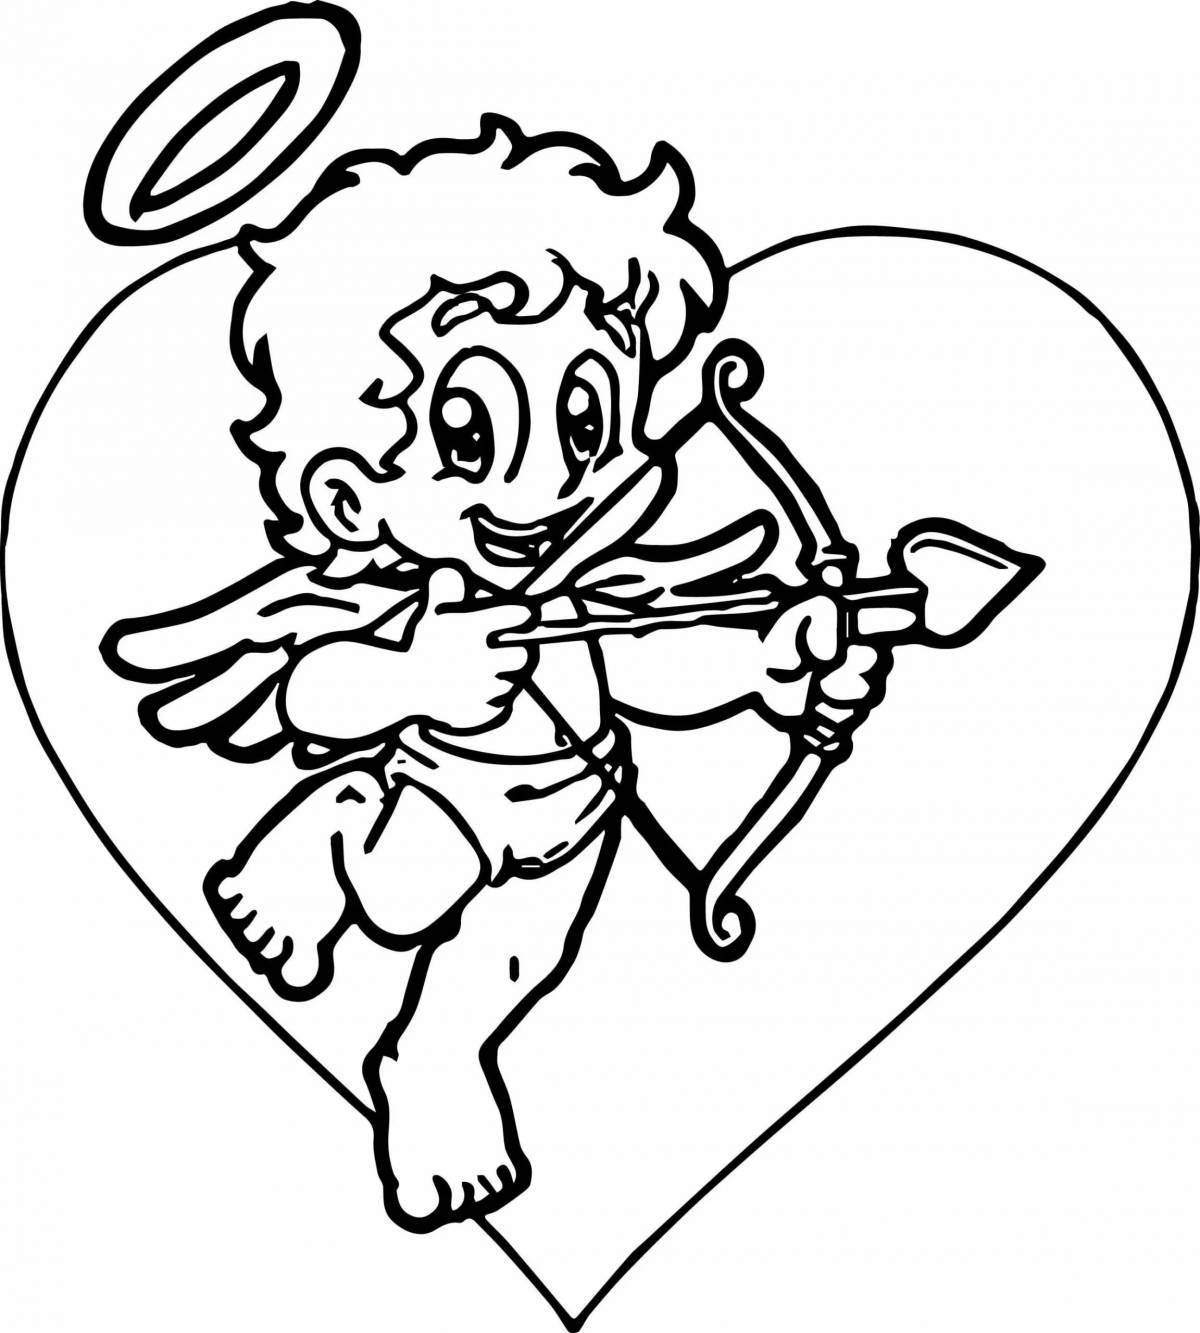 Coloring page cheerful cupid